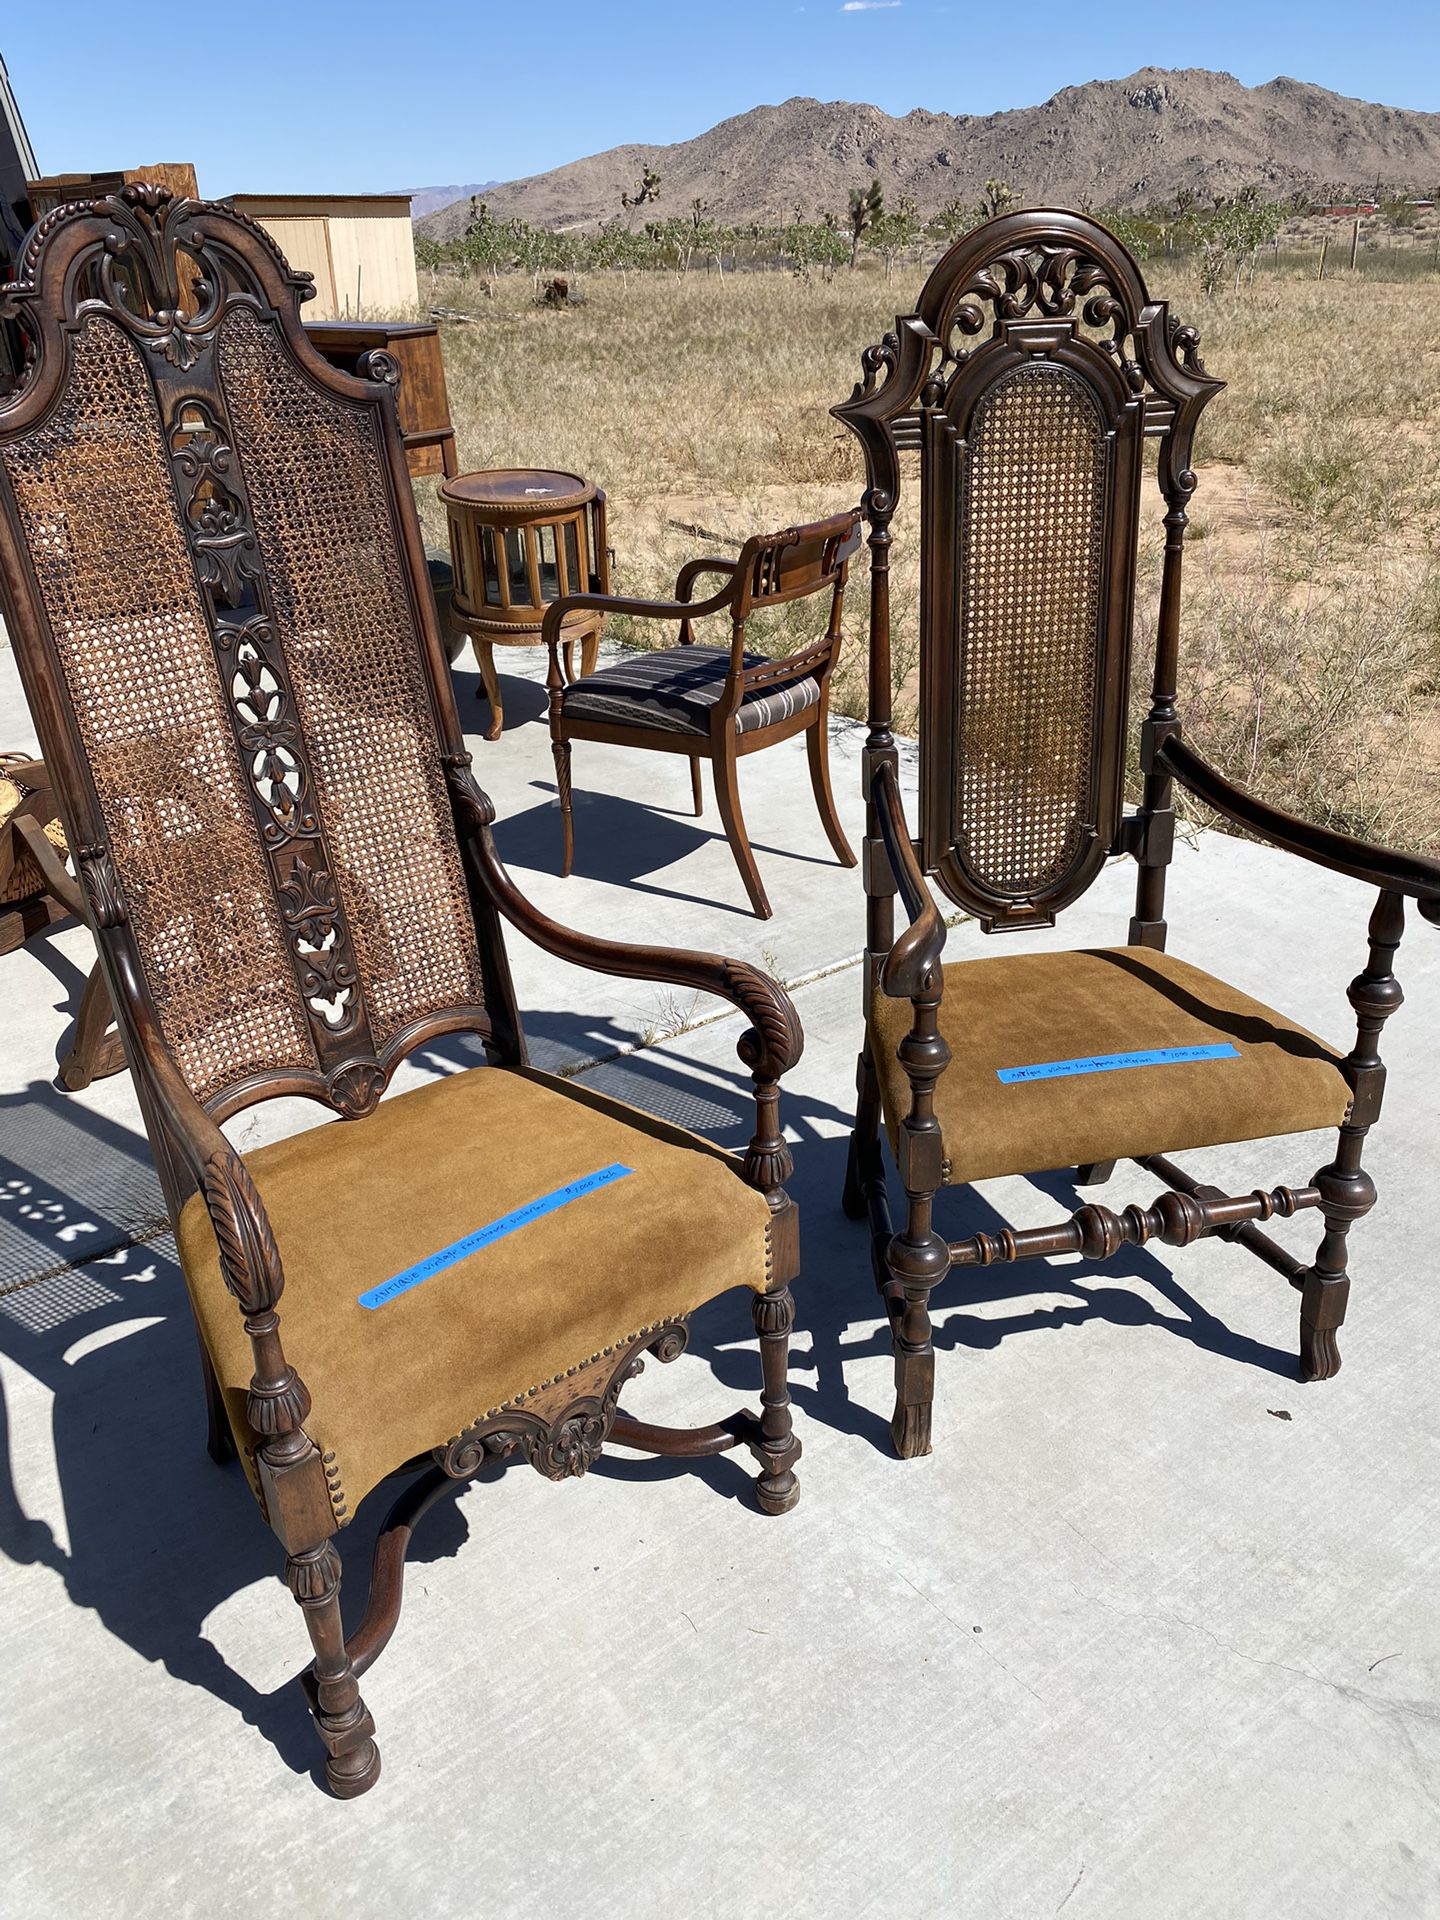 Victorian High back Chairs Values At $5000 Each Sell $1000 Each 